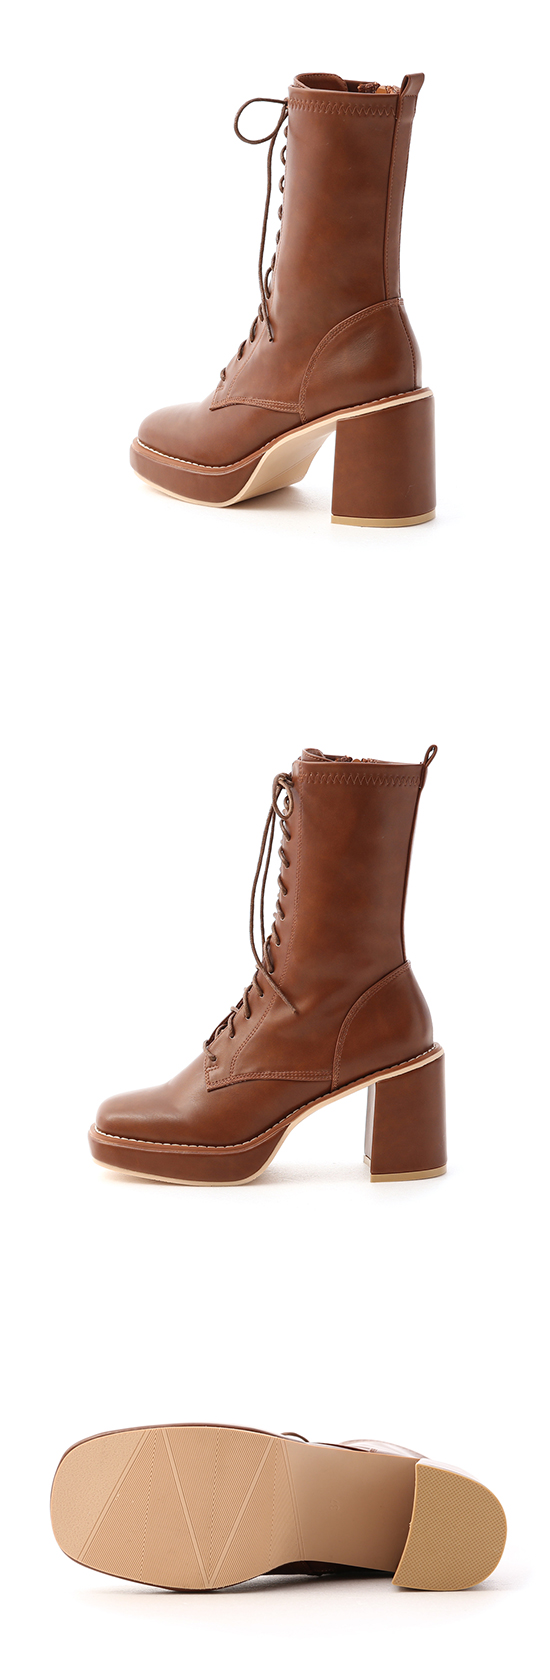 Platform Square Toe Lace-Up Boots Brown